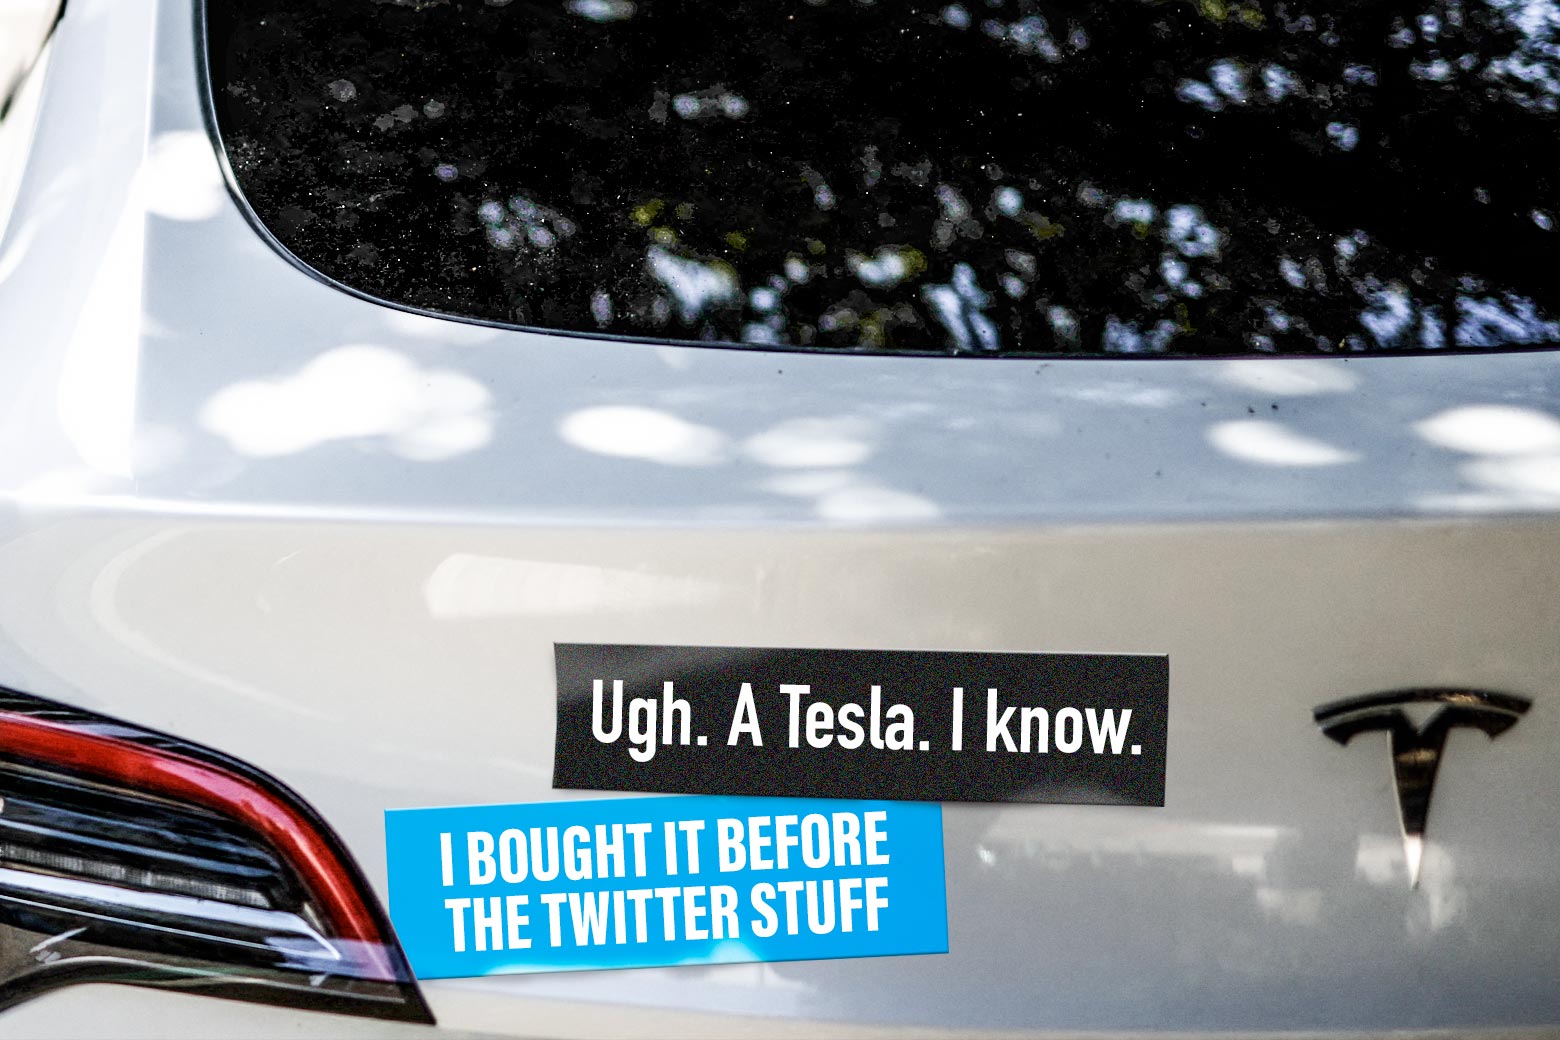 A Tesla with bumper stickers that are rude.